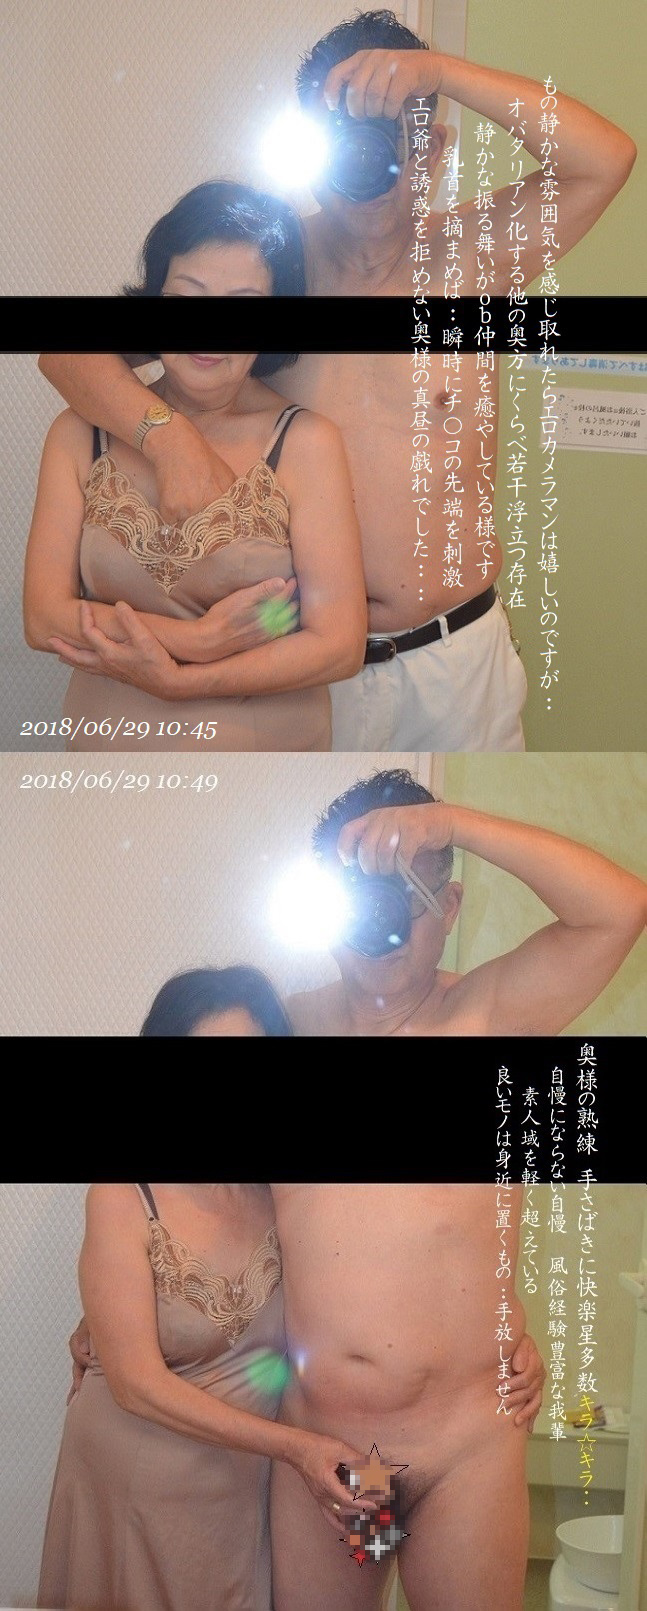 yamigama投稿 Best adult videos and photos